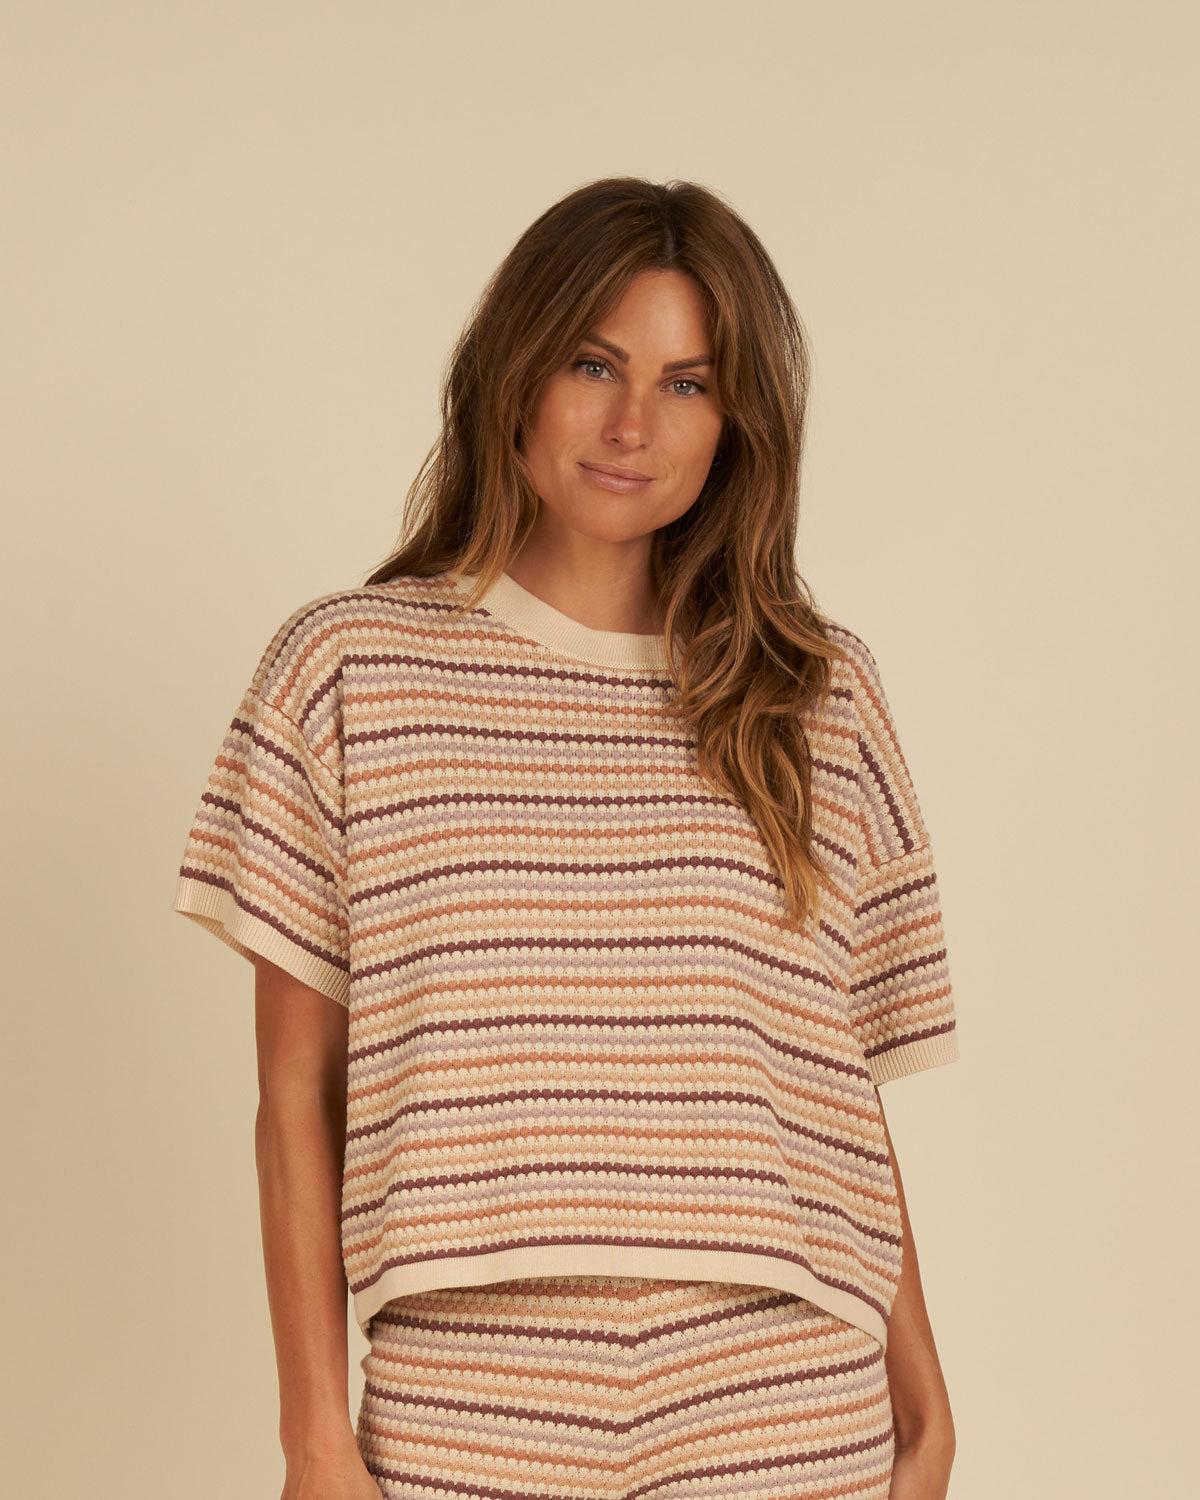 Rylee and Cru Women's Boxy Crop Knit Tee - Honeycomb Stripe - Mulberry / Mauve / Clay / Sand